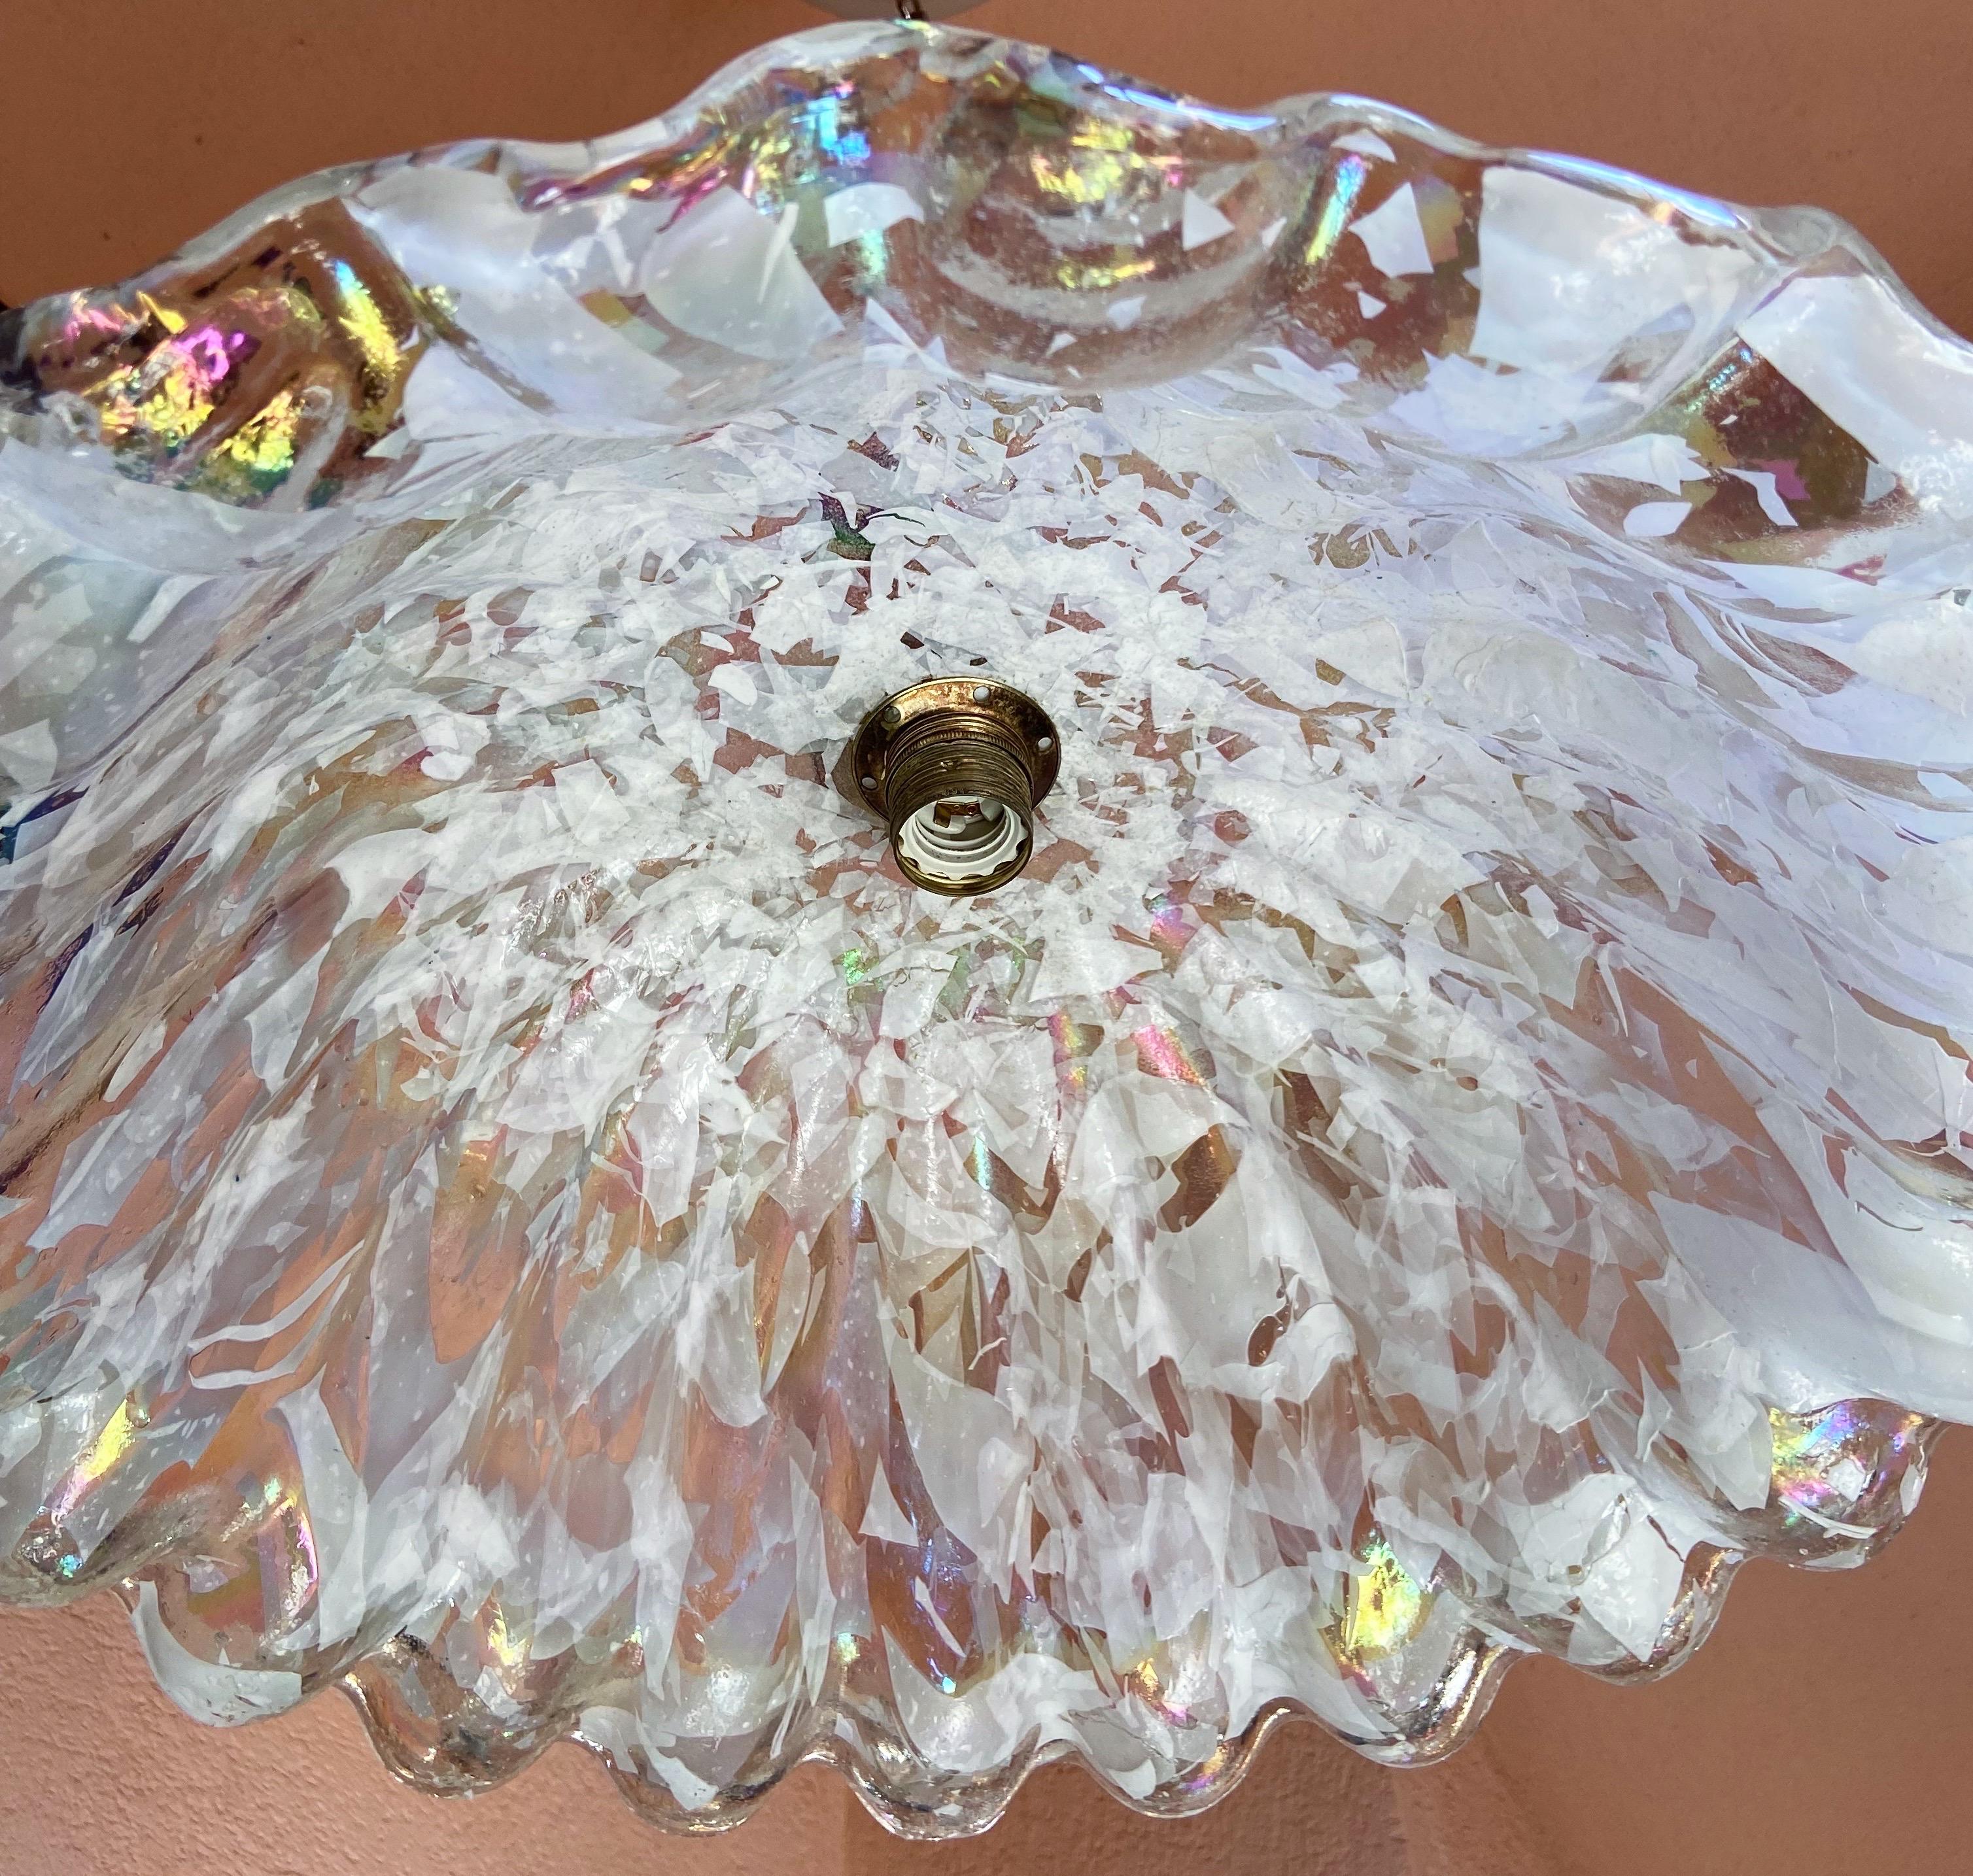 Mid-Century Modern Murano Glass Ceiling Light in 'Psychedelic' Rainbow Colour In Good Condition For Sale In Palermo, PA